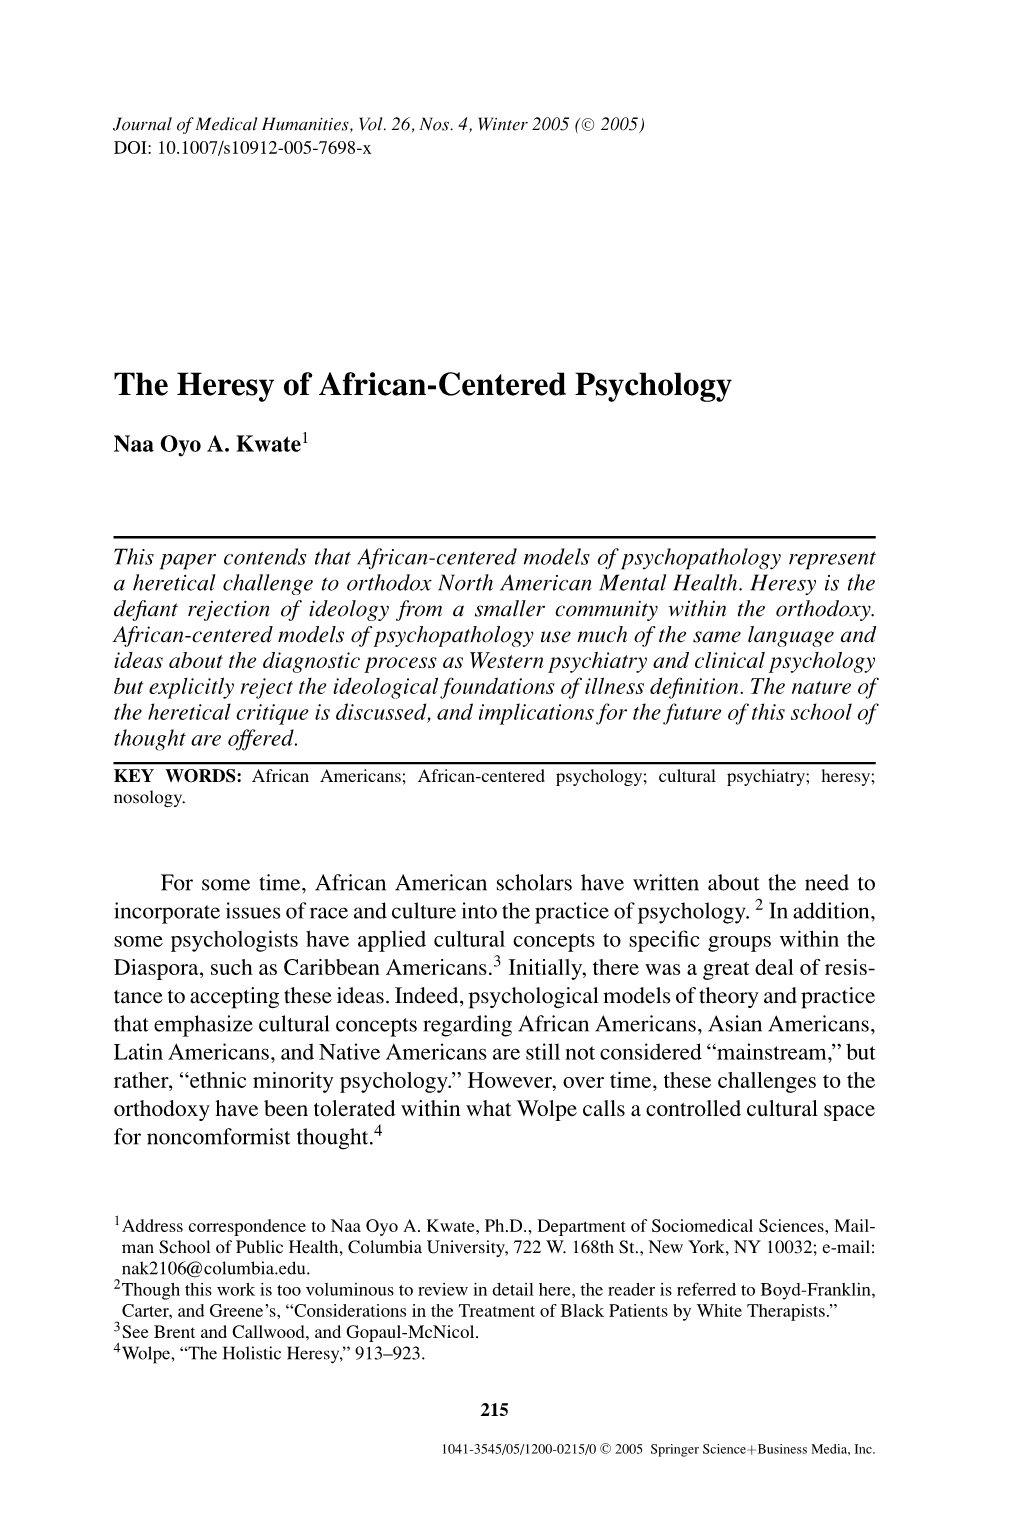 The Heresy of African-Centered Psychology